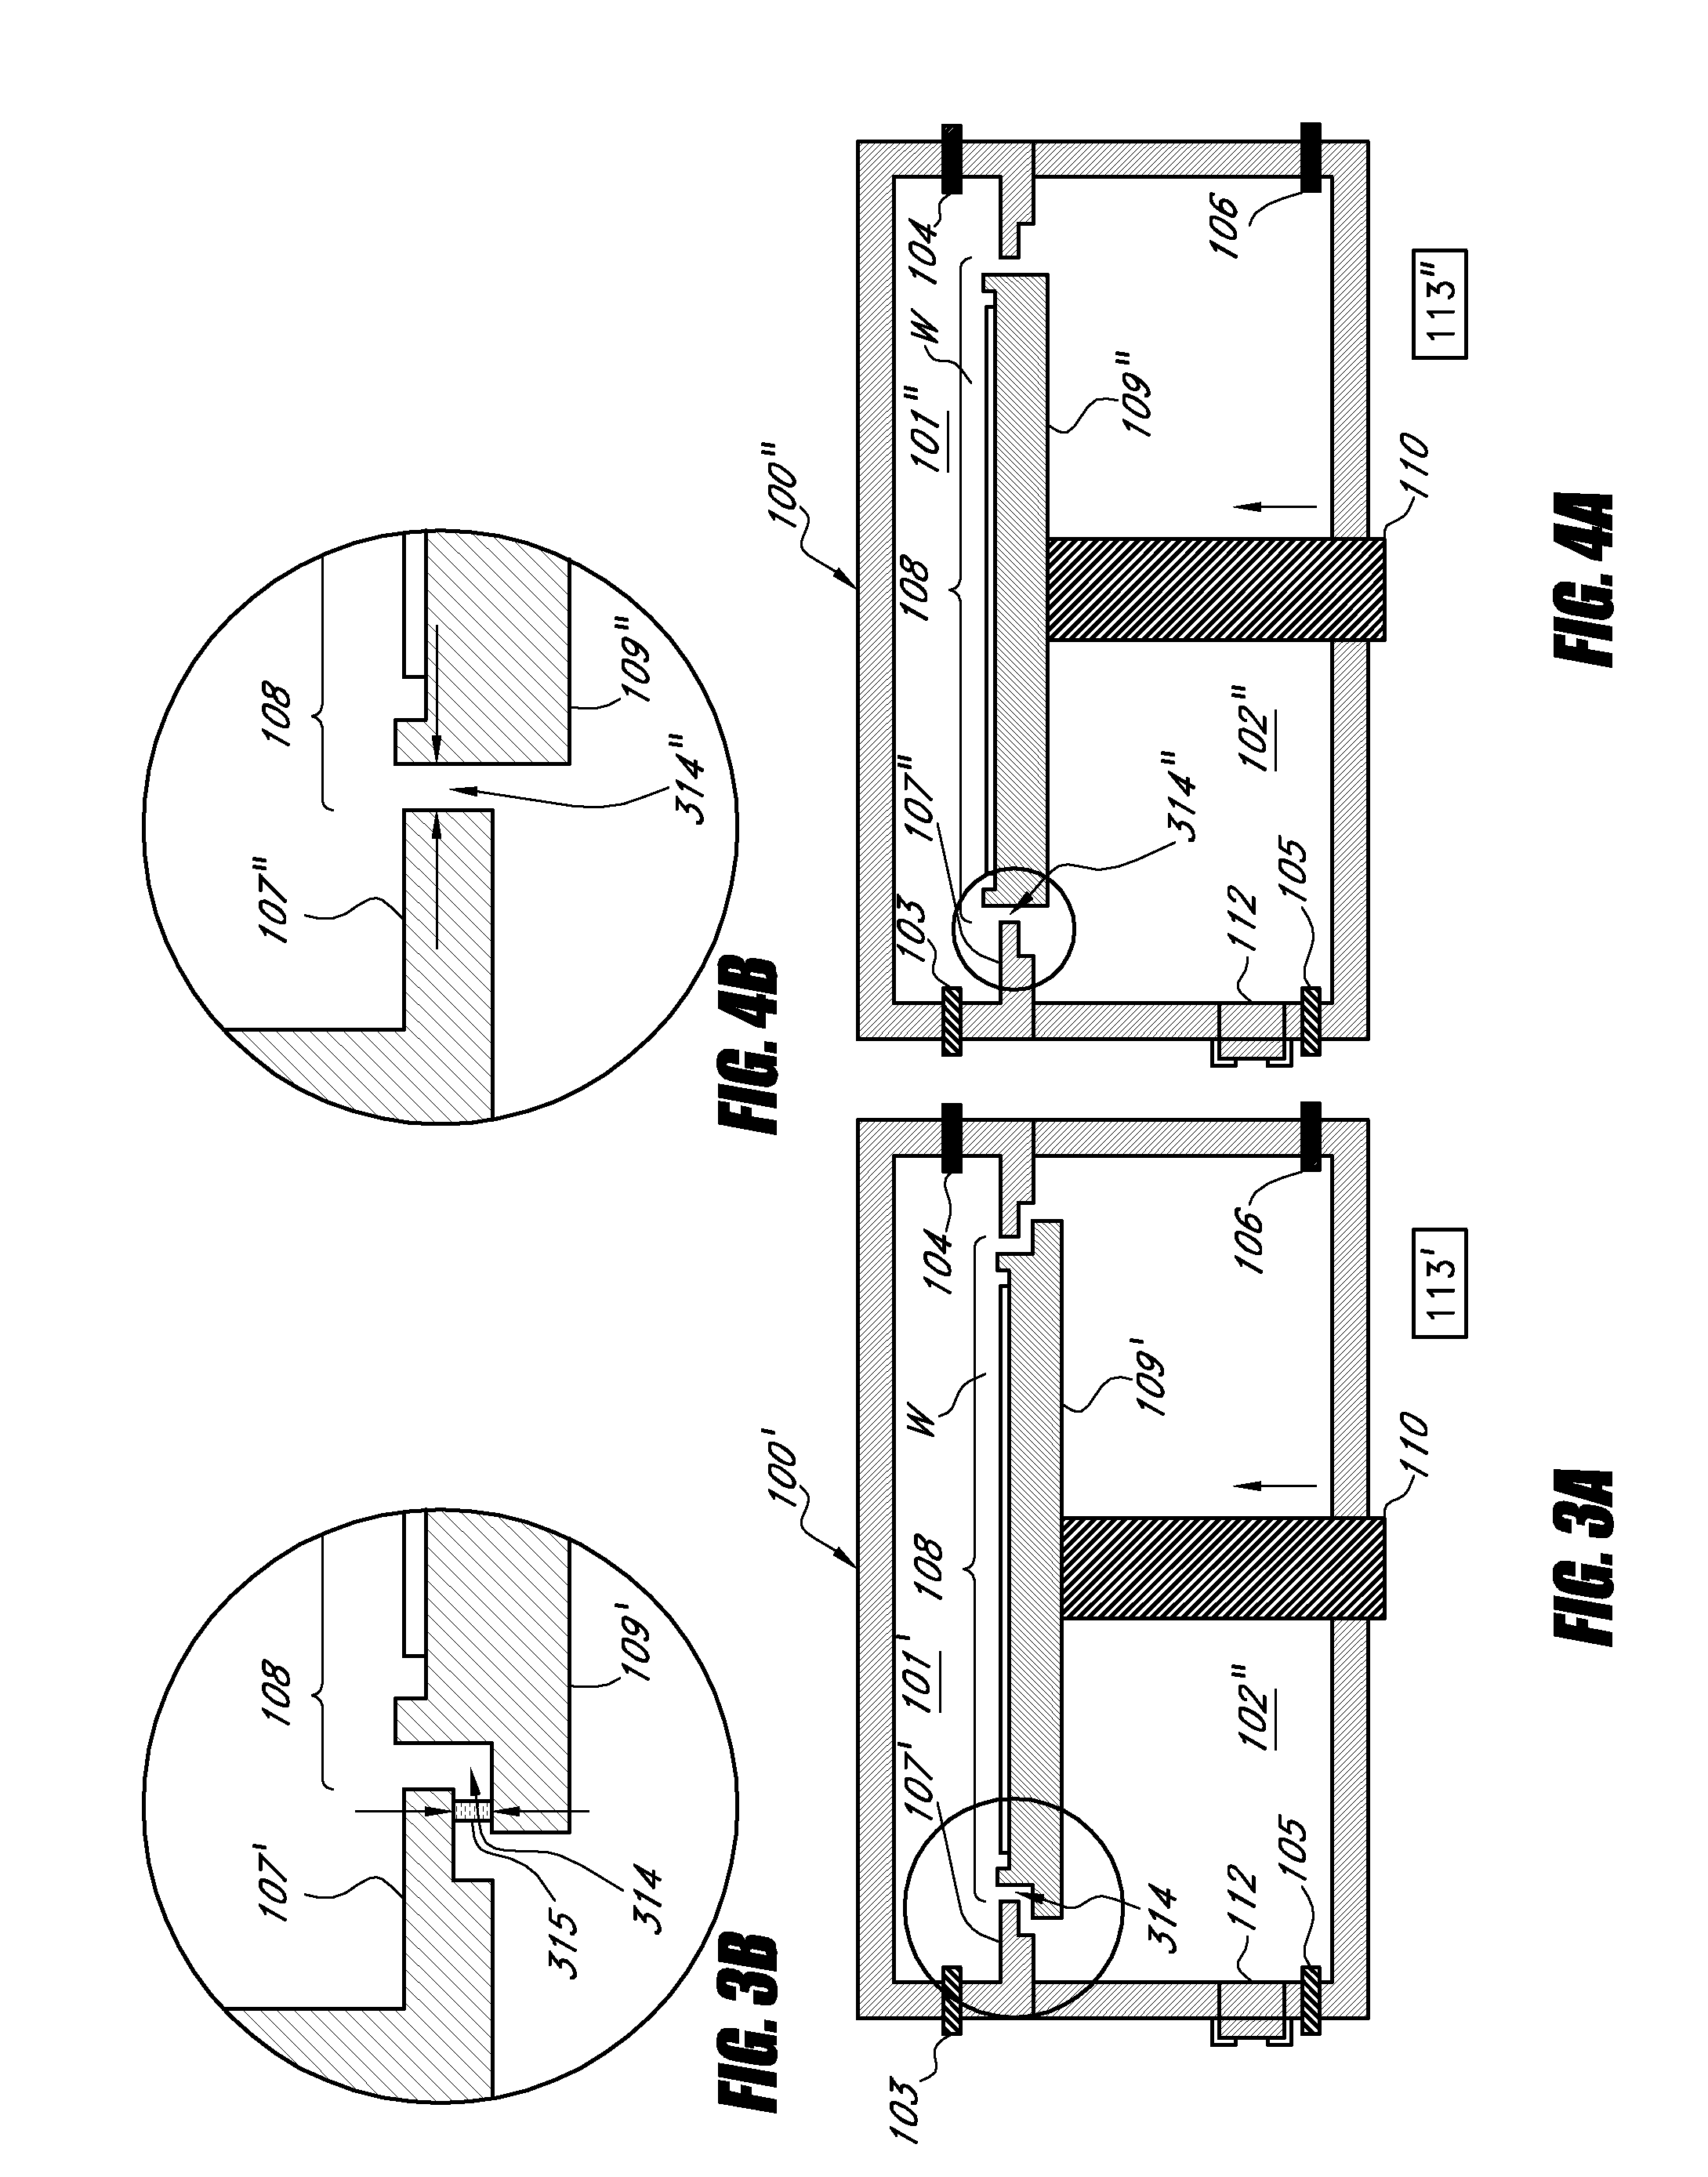 Method and apparatus for minimizing contamination in semiconductor processing chamber